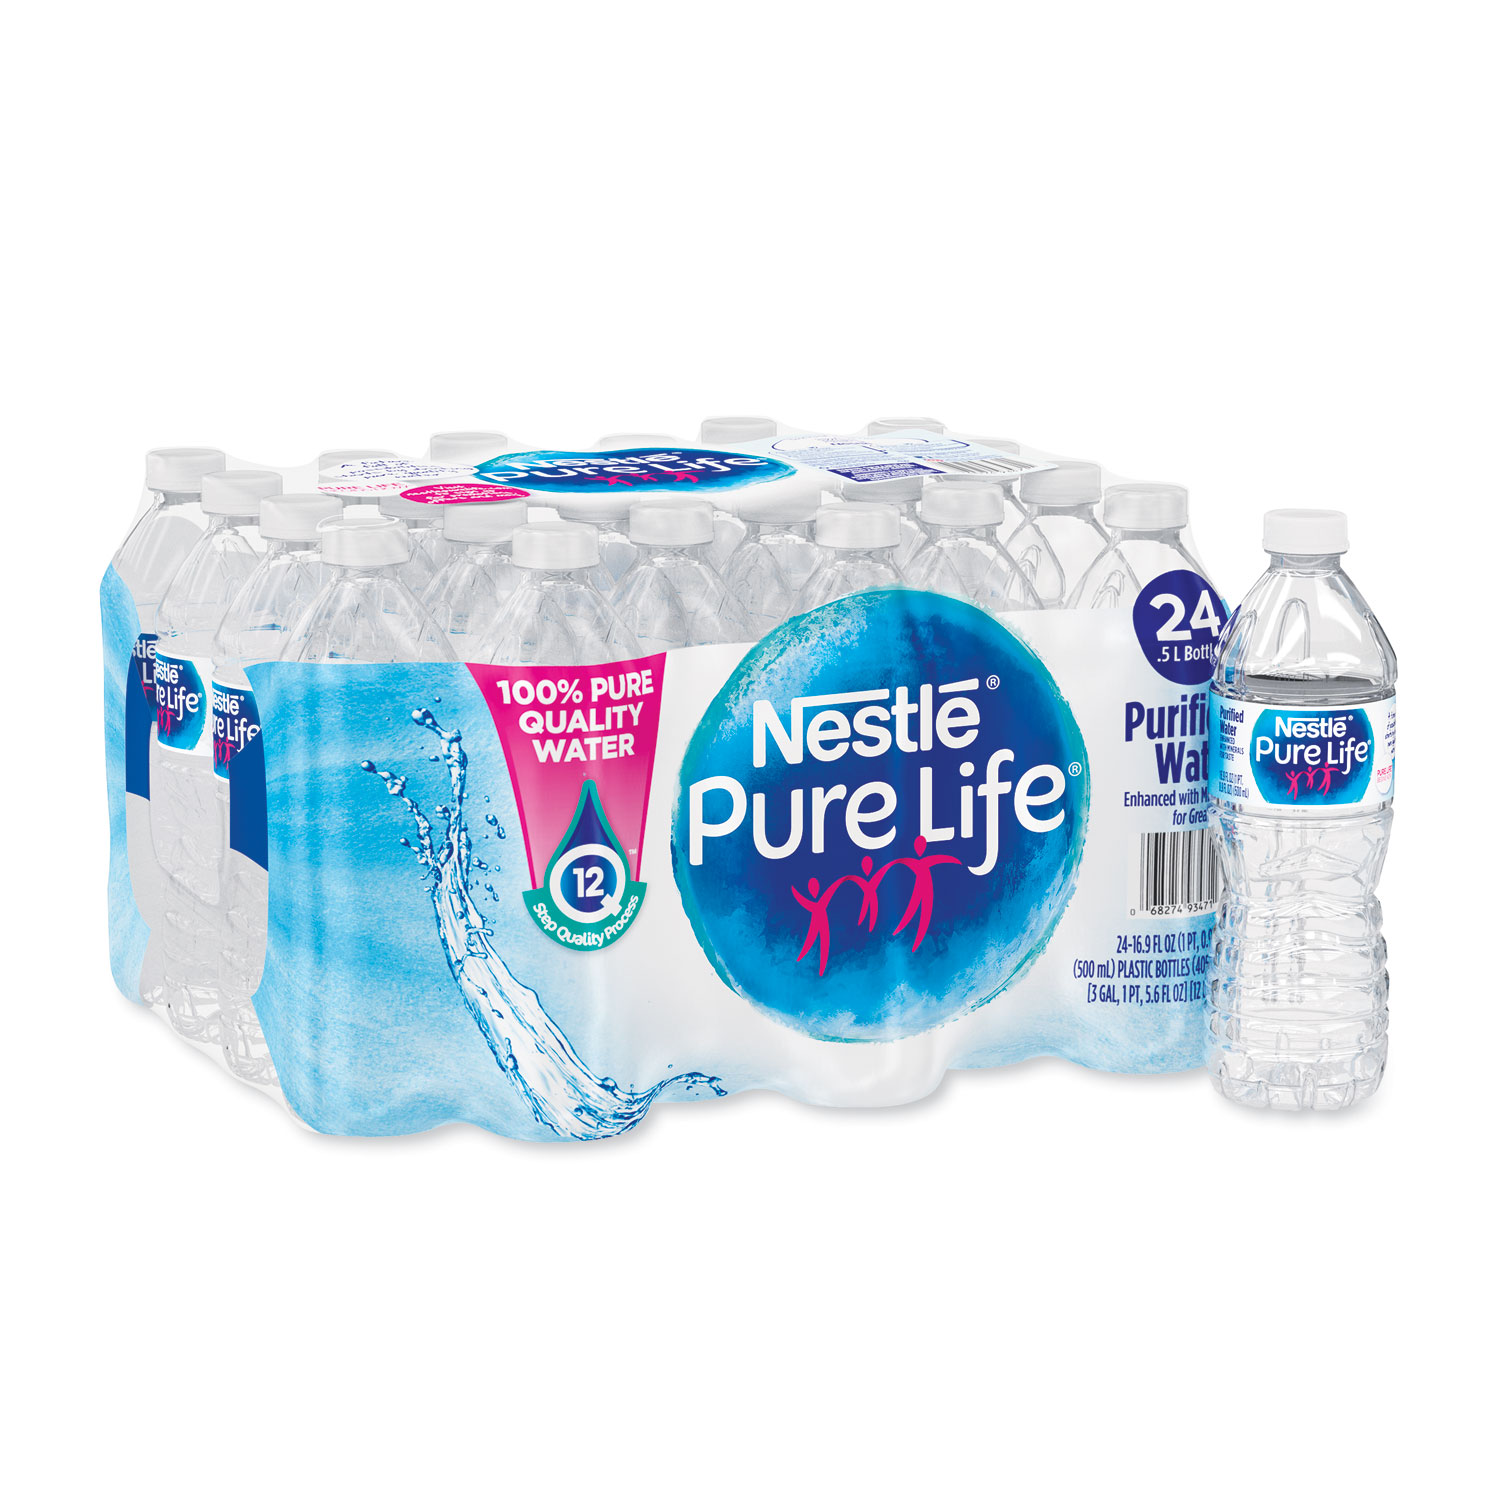  Nestle Waters 12273758 Pure Life Purified Water, 0.5 liter Bottles, 24/Carton, 78 Cartons/Pallet (NLE101264) 